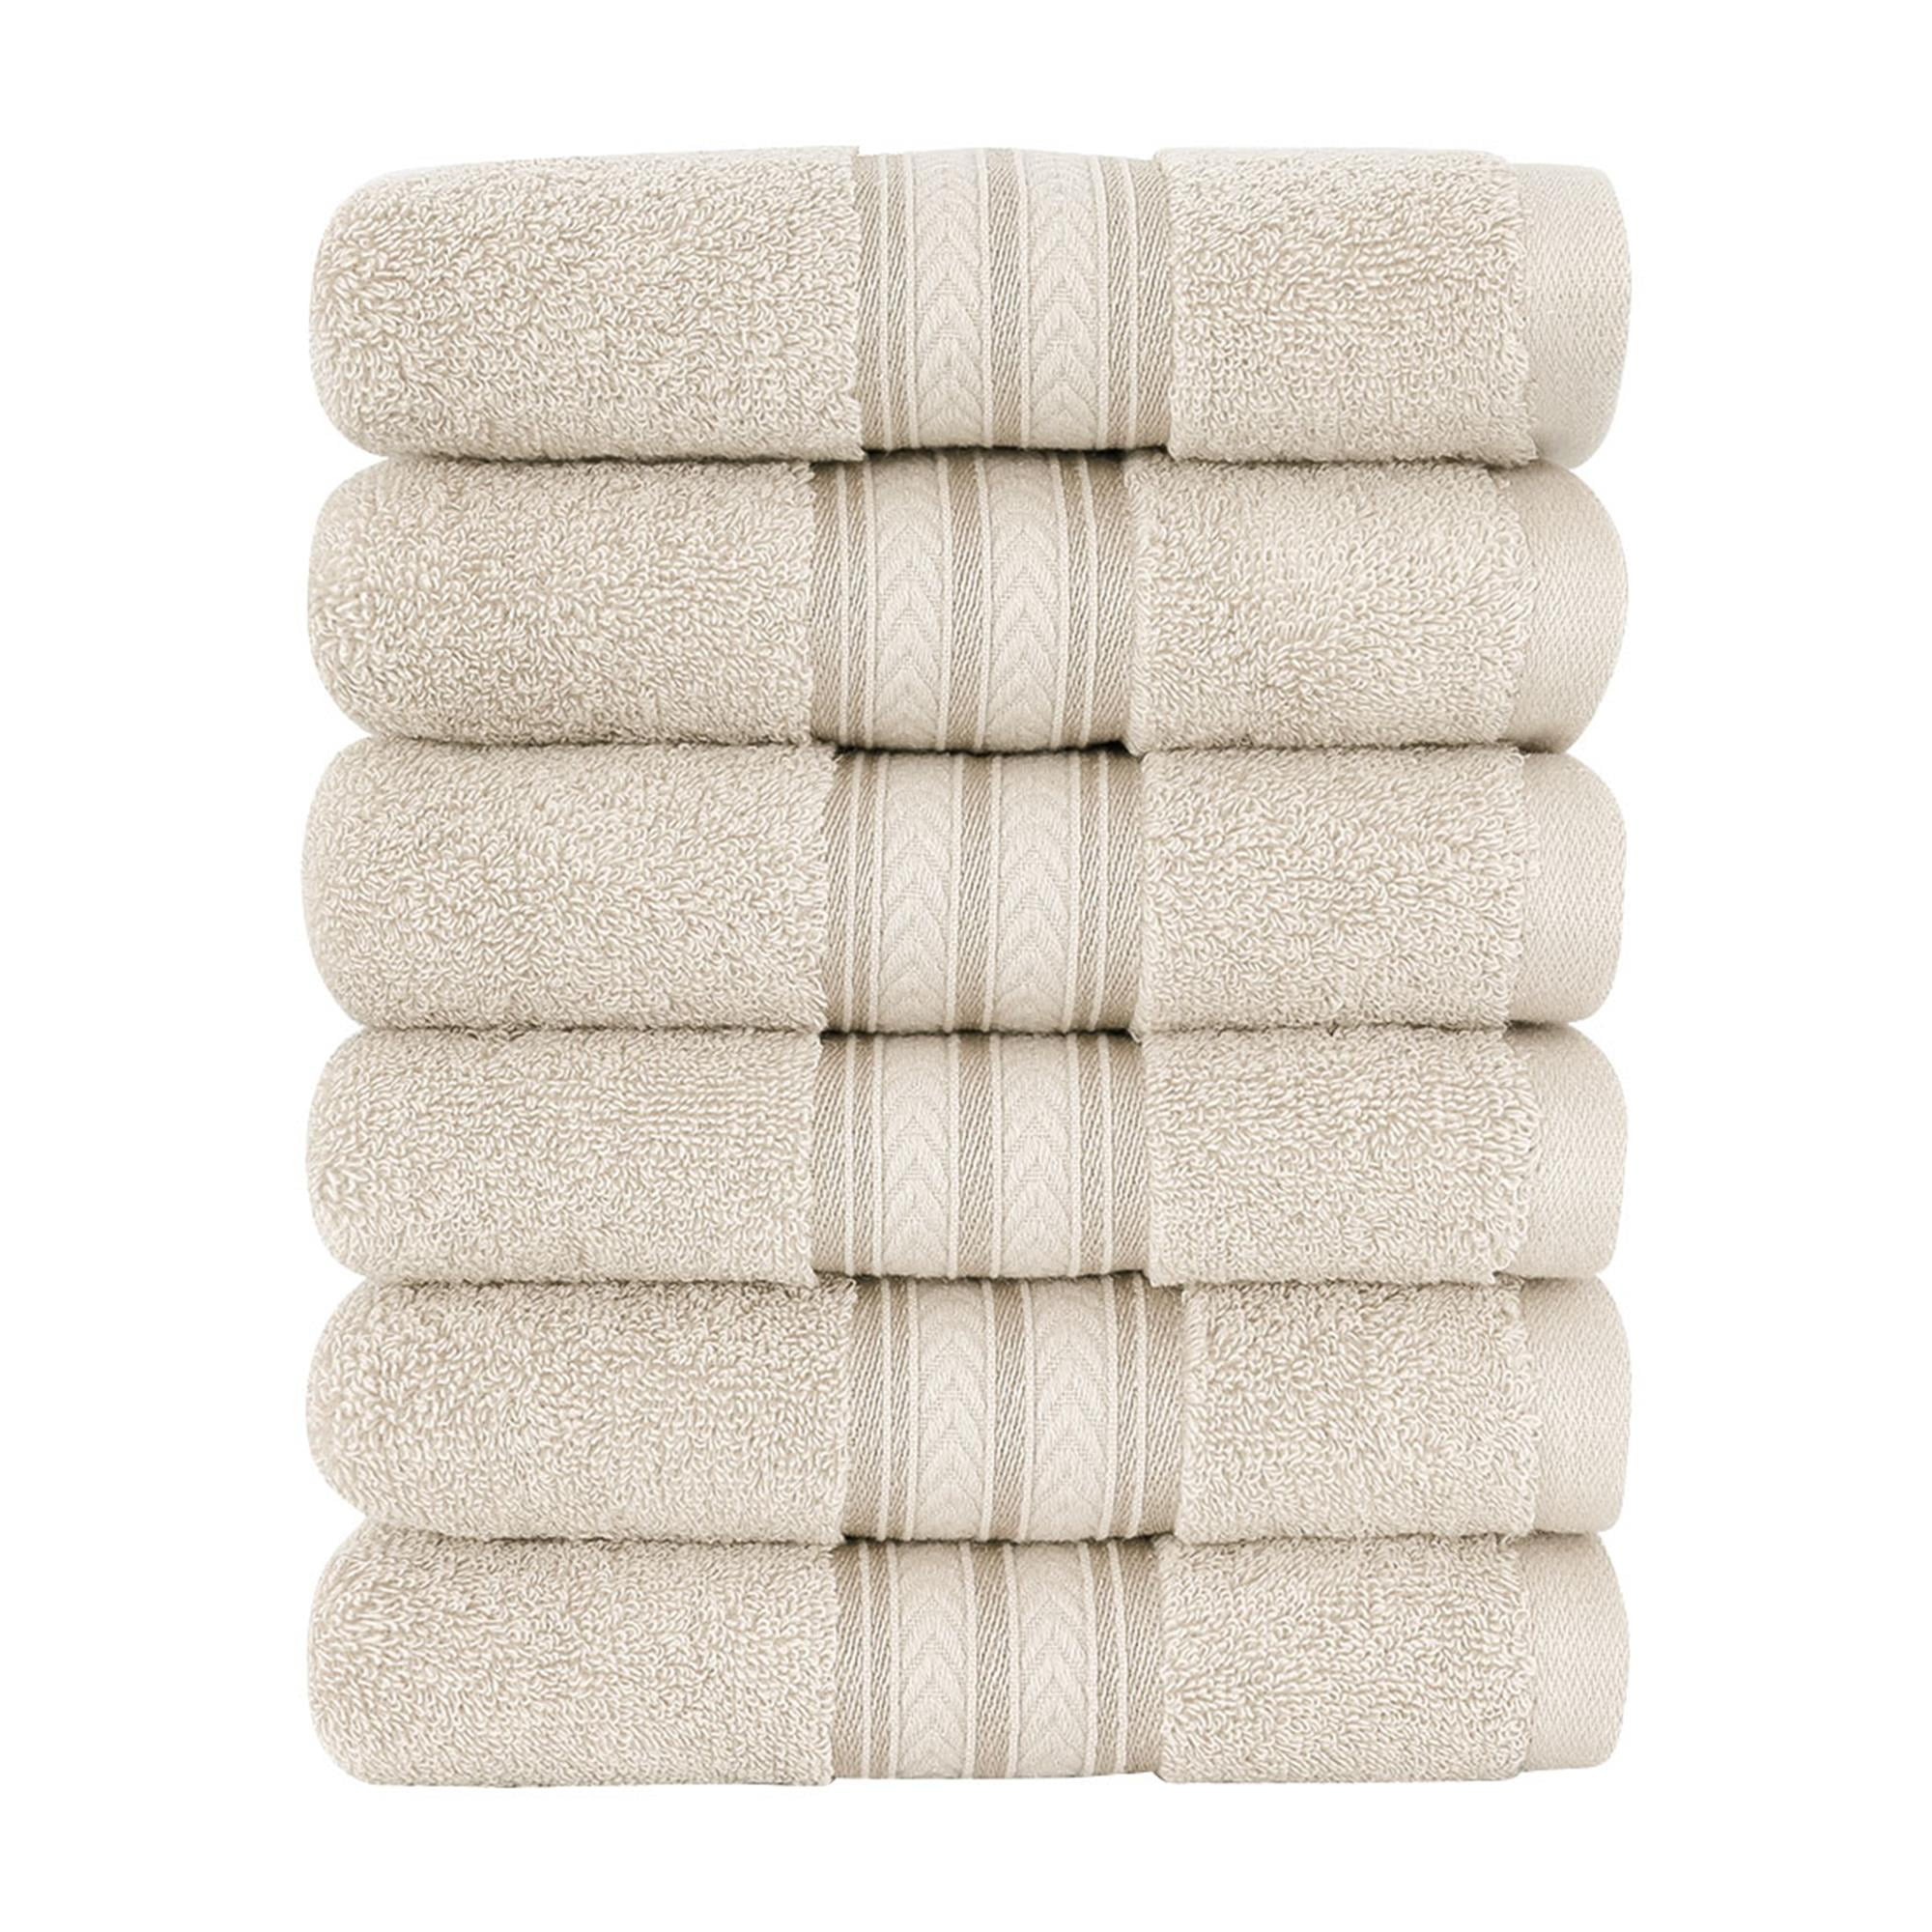 6 Pieces Luxury Hand Towels, 100% Cotton Absorbent Bathroom Towels ...